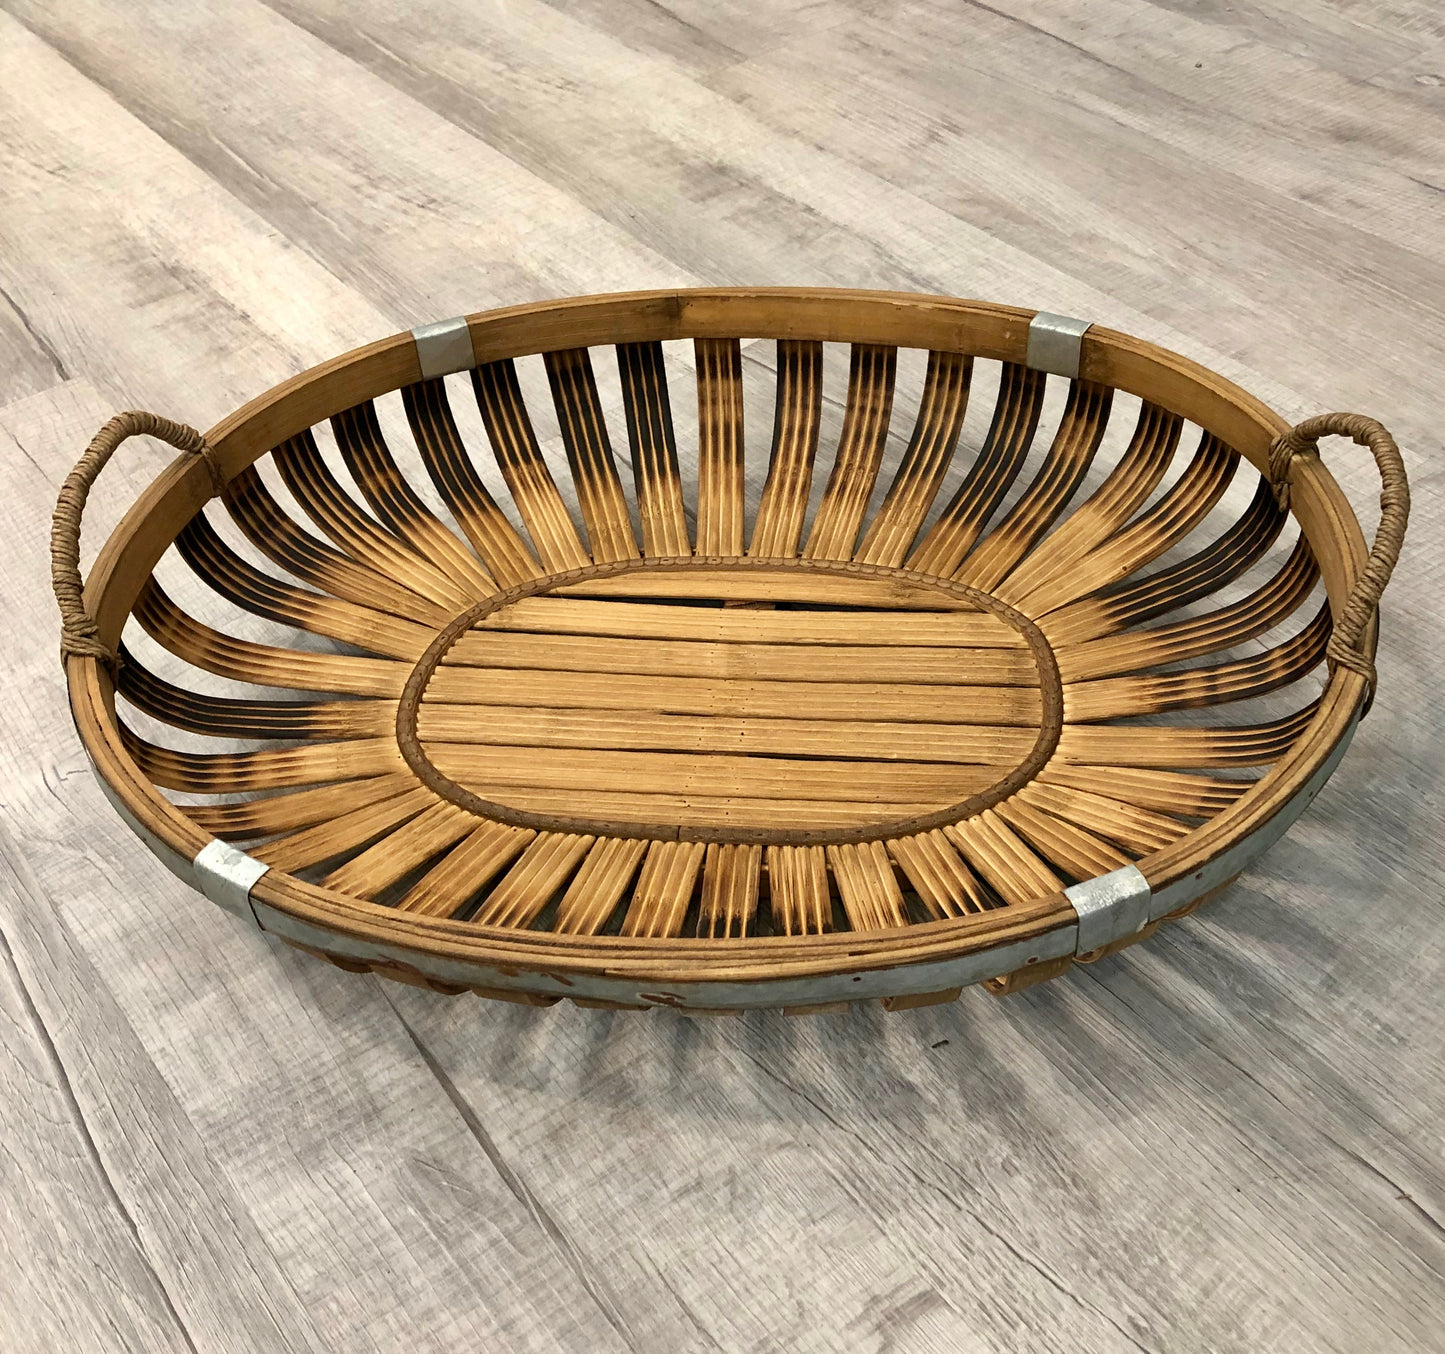 Tray, Oval Wood and Metal, with Handles, Large